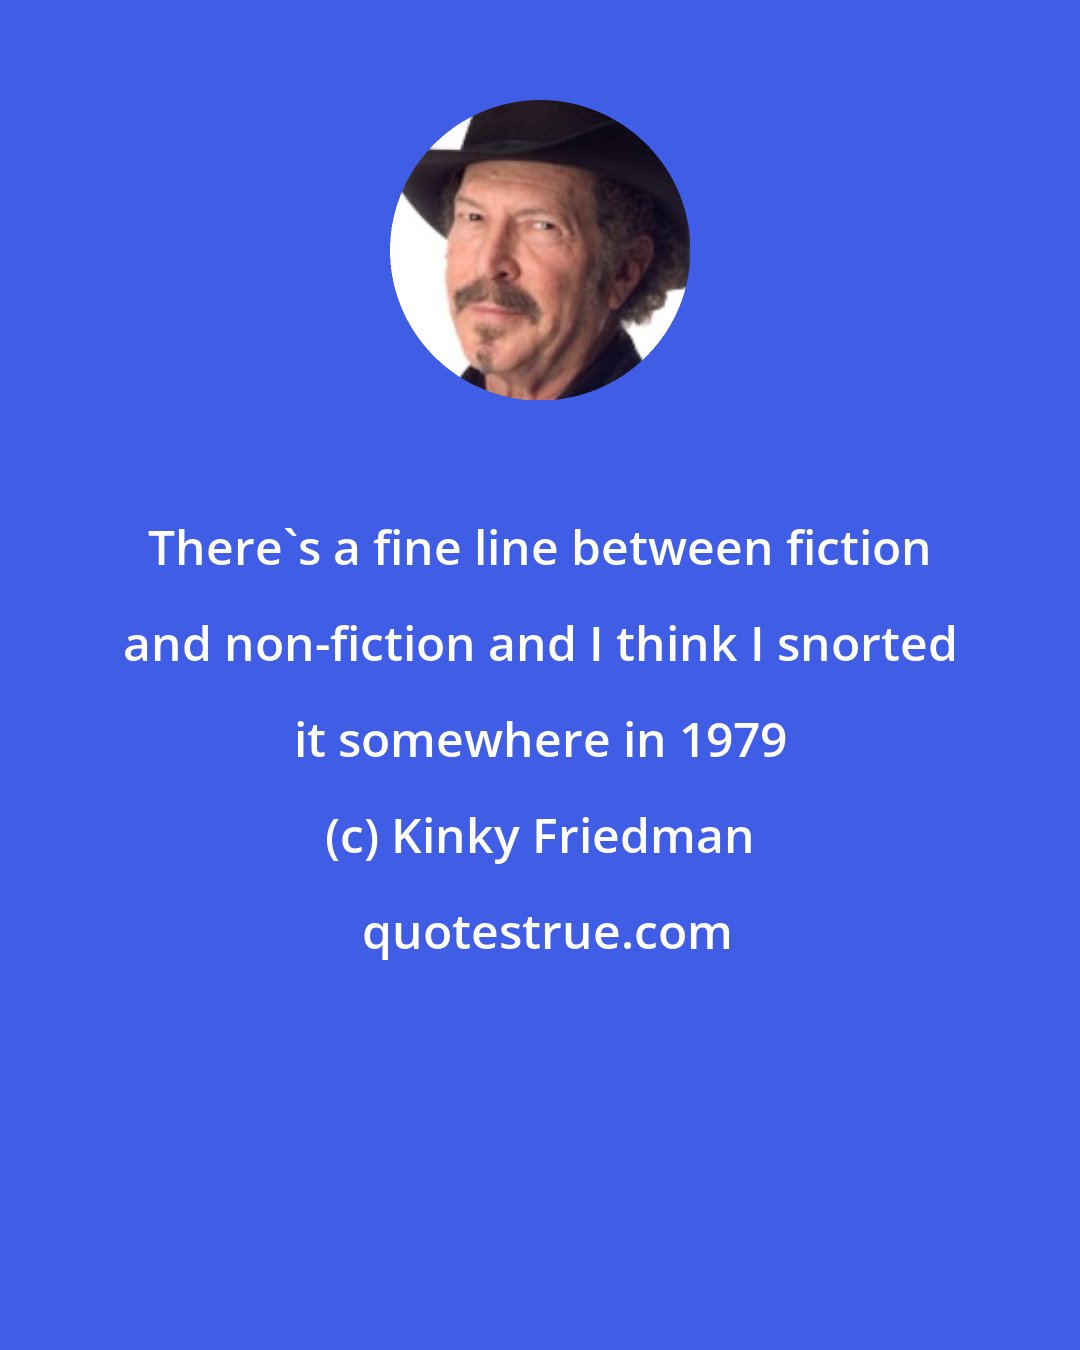 Kinky Friedman: There's a fine line between fiction and non-fiction and I think I snorted it somewhere in 1979